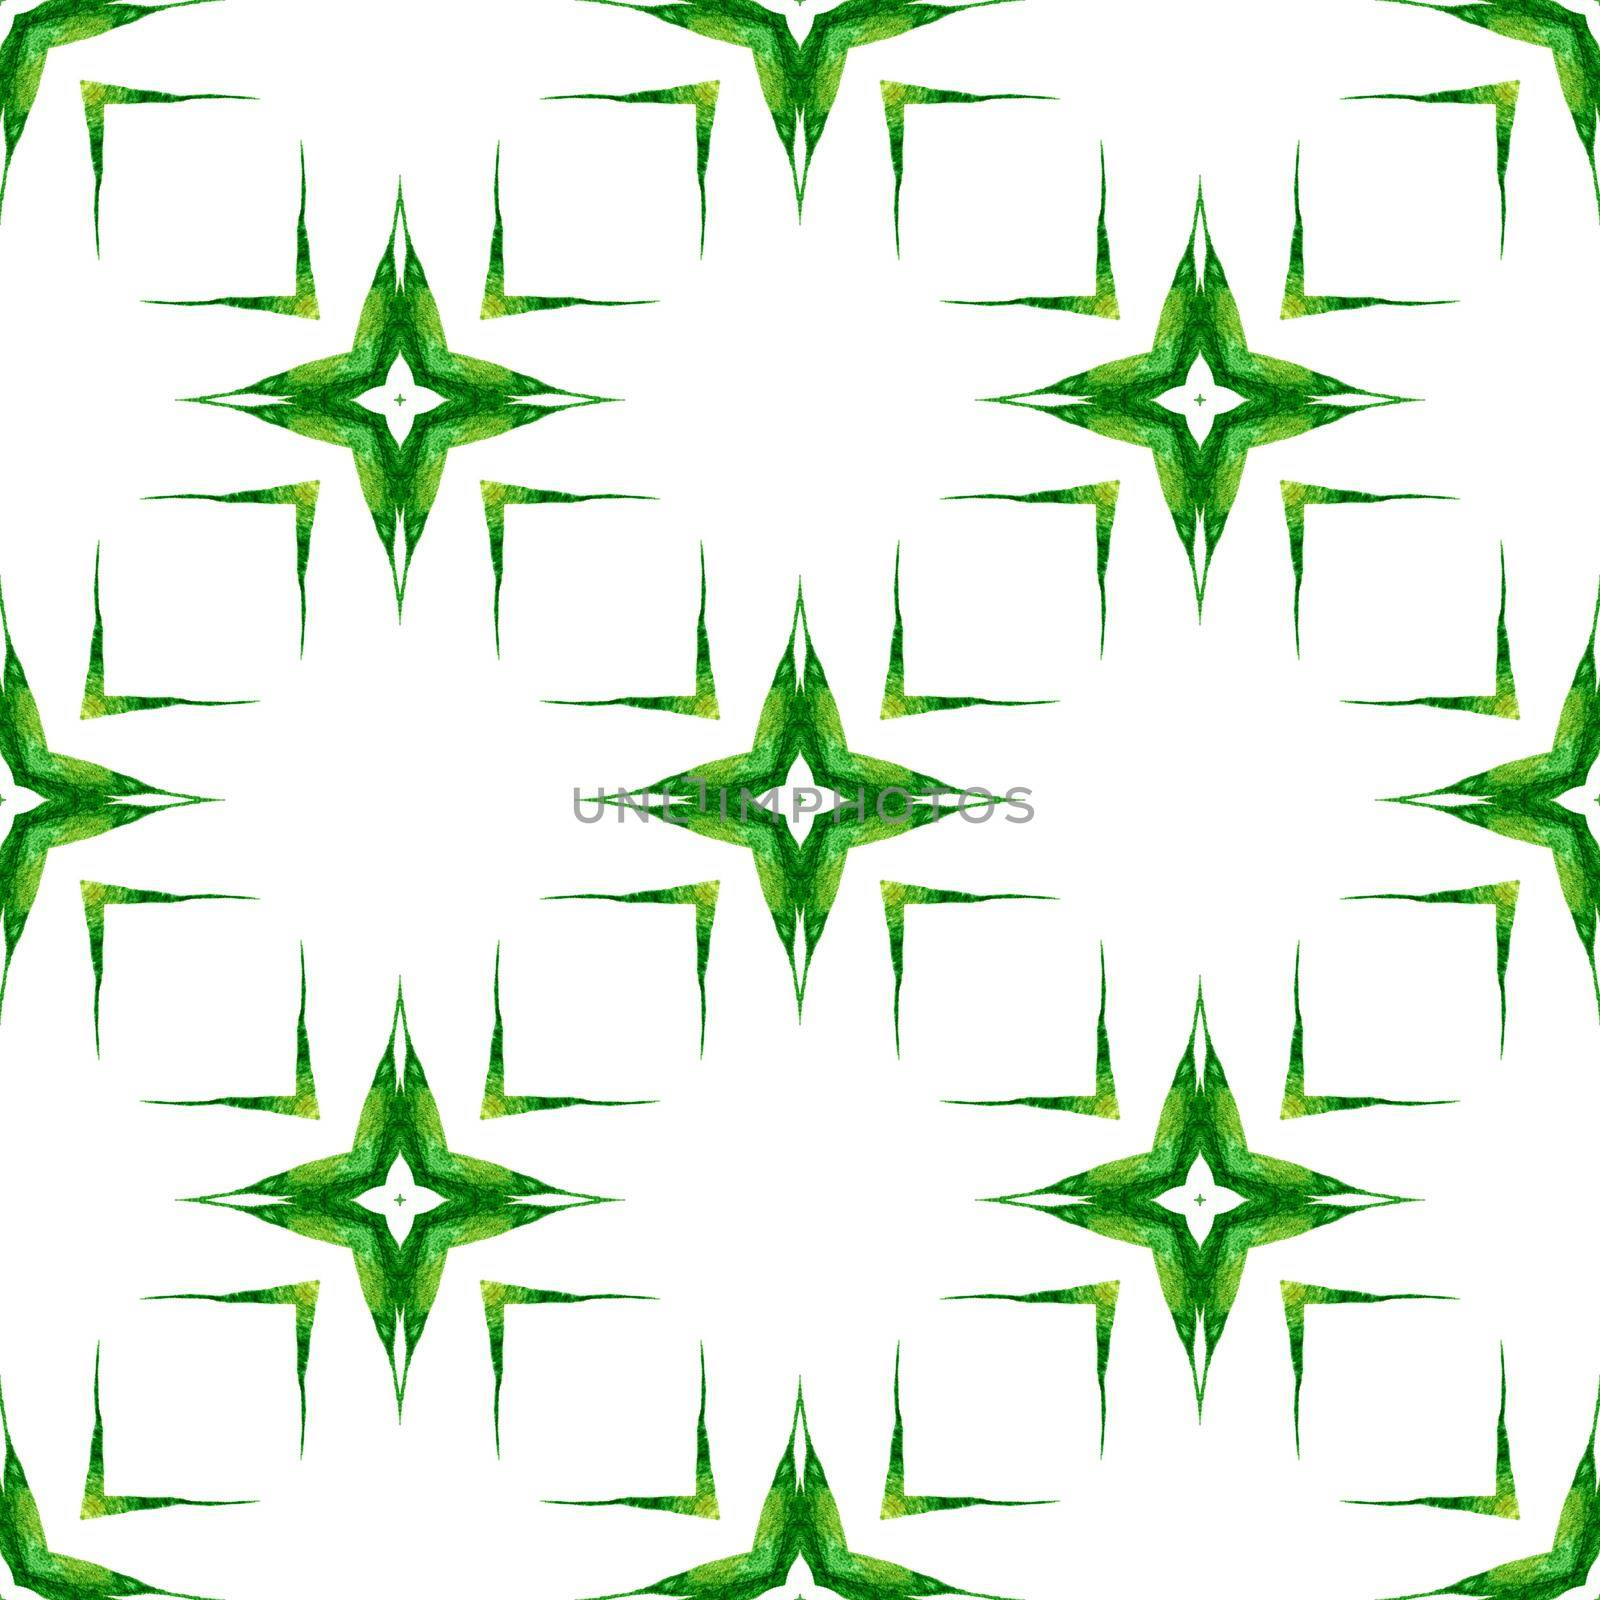 Ethnic hand painted pattern. Green optimal boho by beginagain